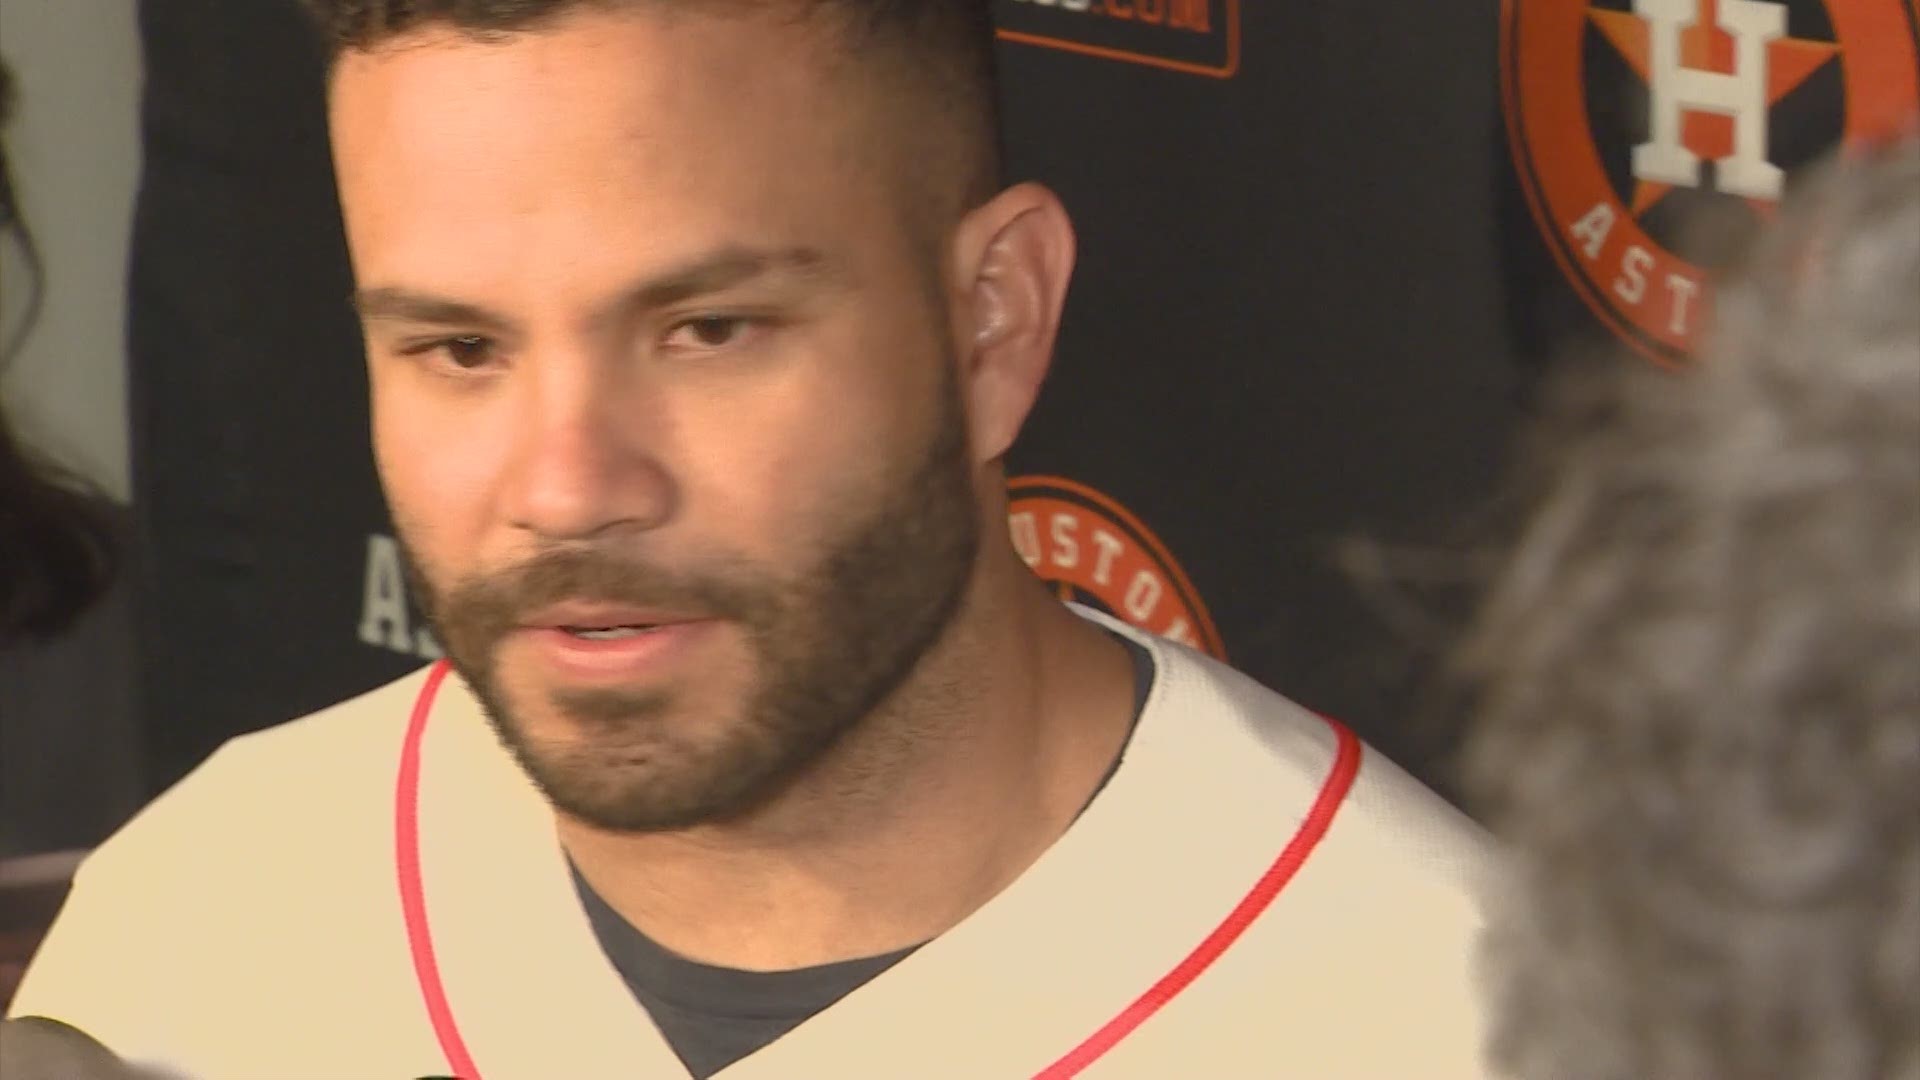 Astros second baseman Jose Altuve fielded questions about Houston's cheating scandal and wearable devices allegations during Fan Fest Saturday at Minute Maid Park.